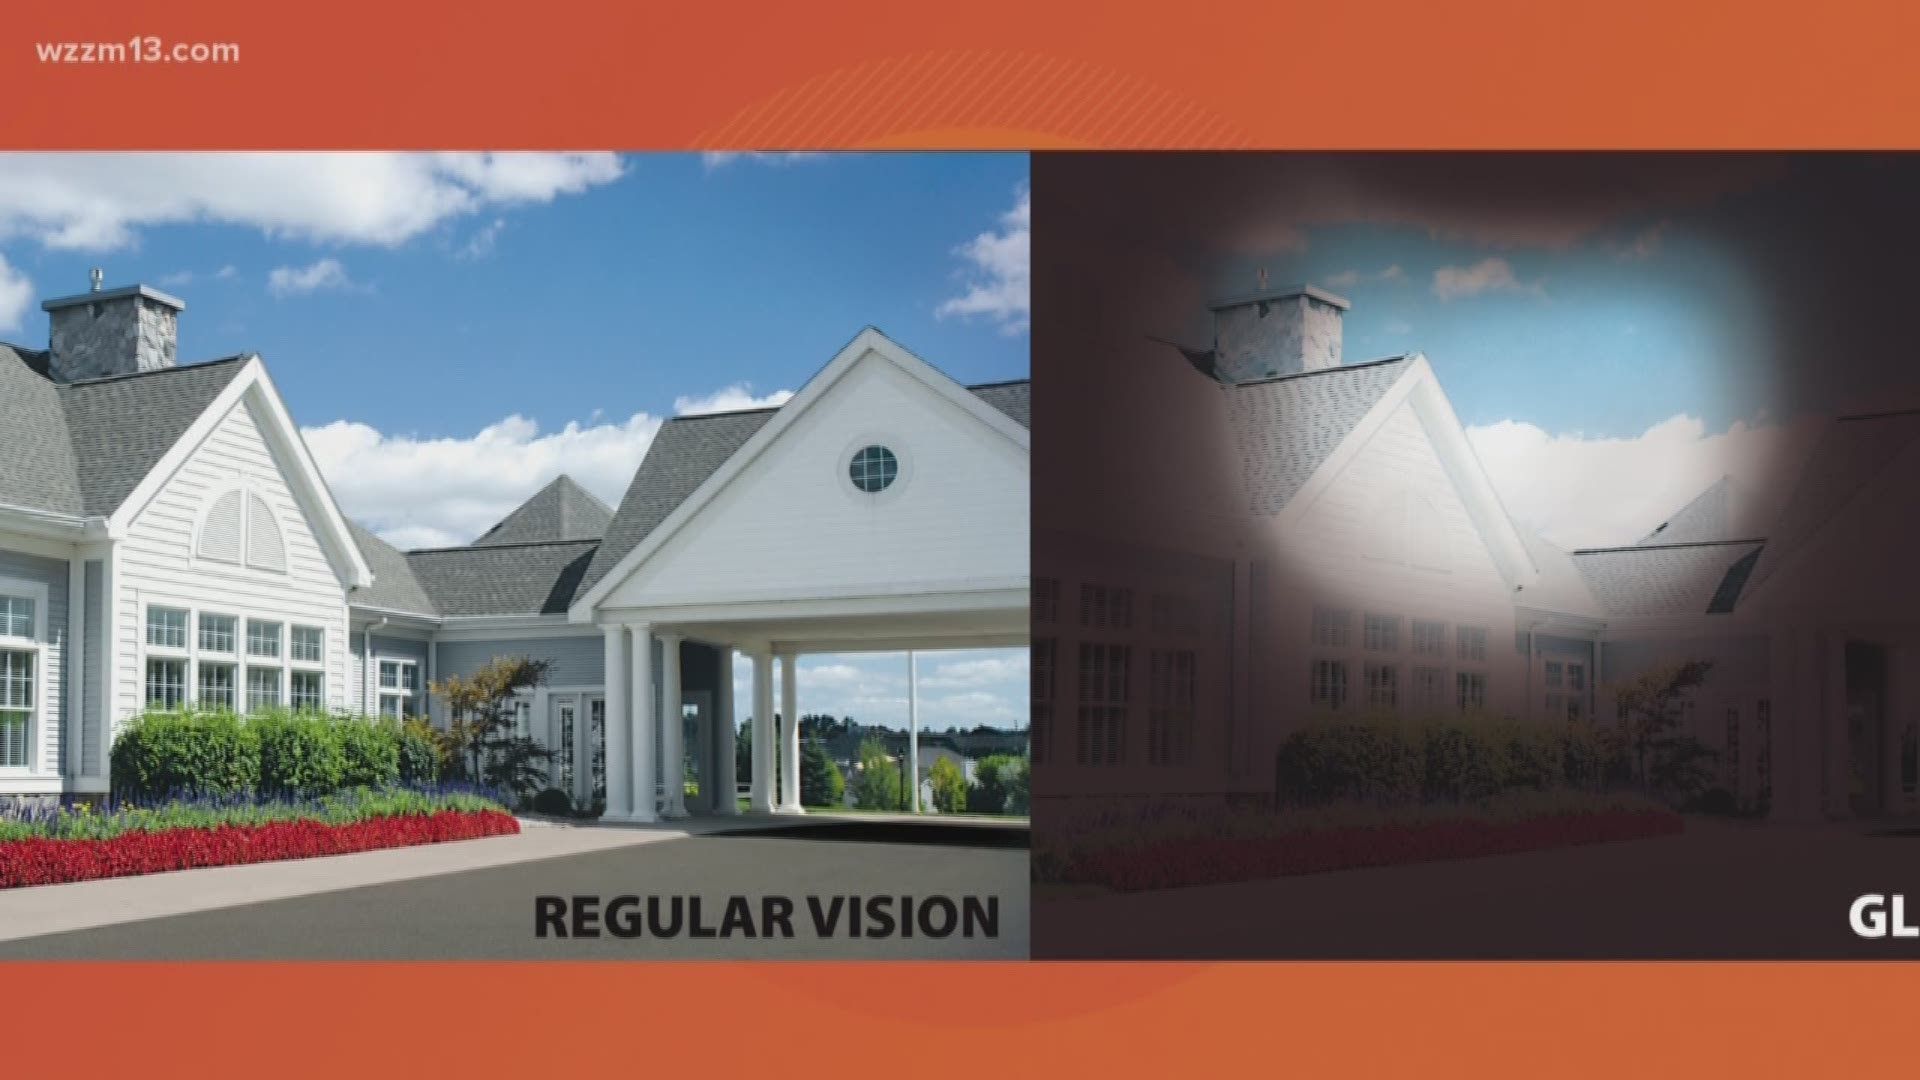 Glaucoma is the leading cause of blindness in adults over 60. Porter Hills has services to help day-to-day life with glaucoma much better.